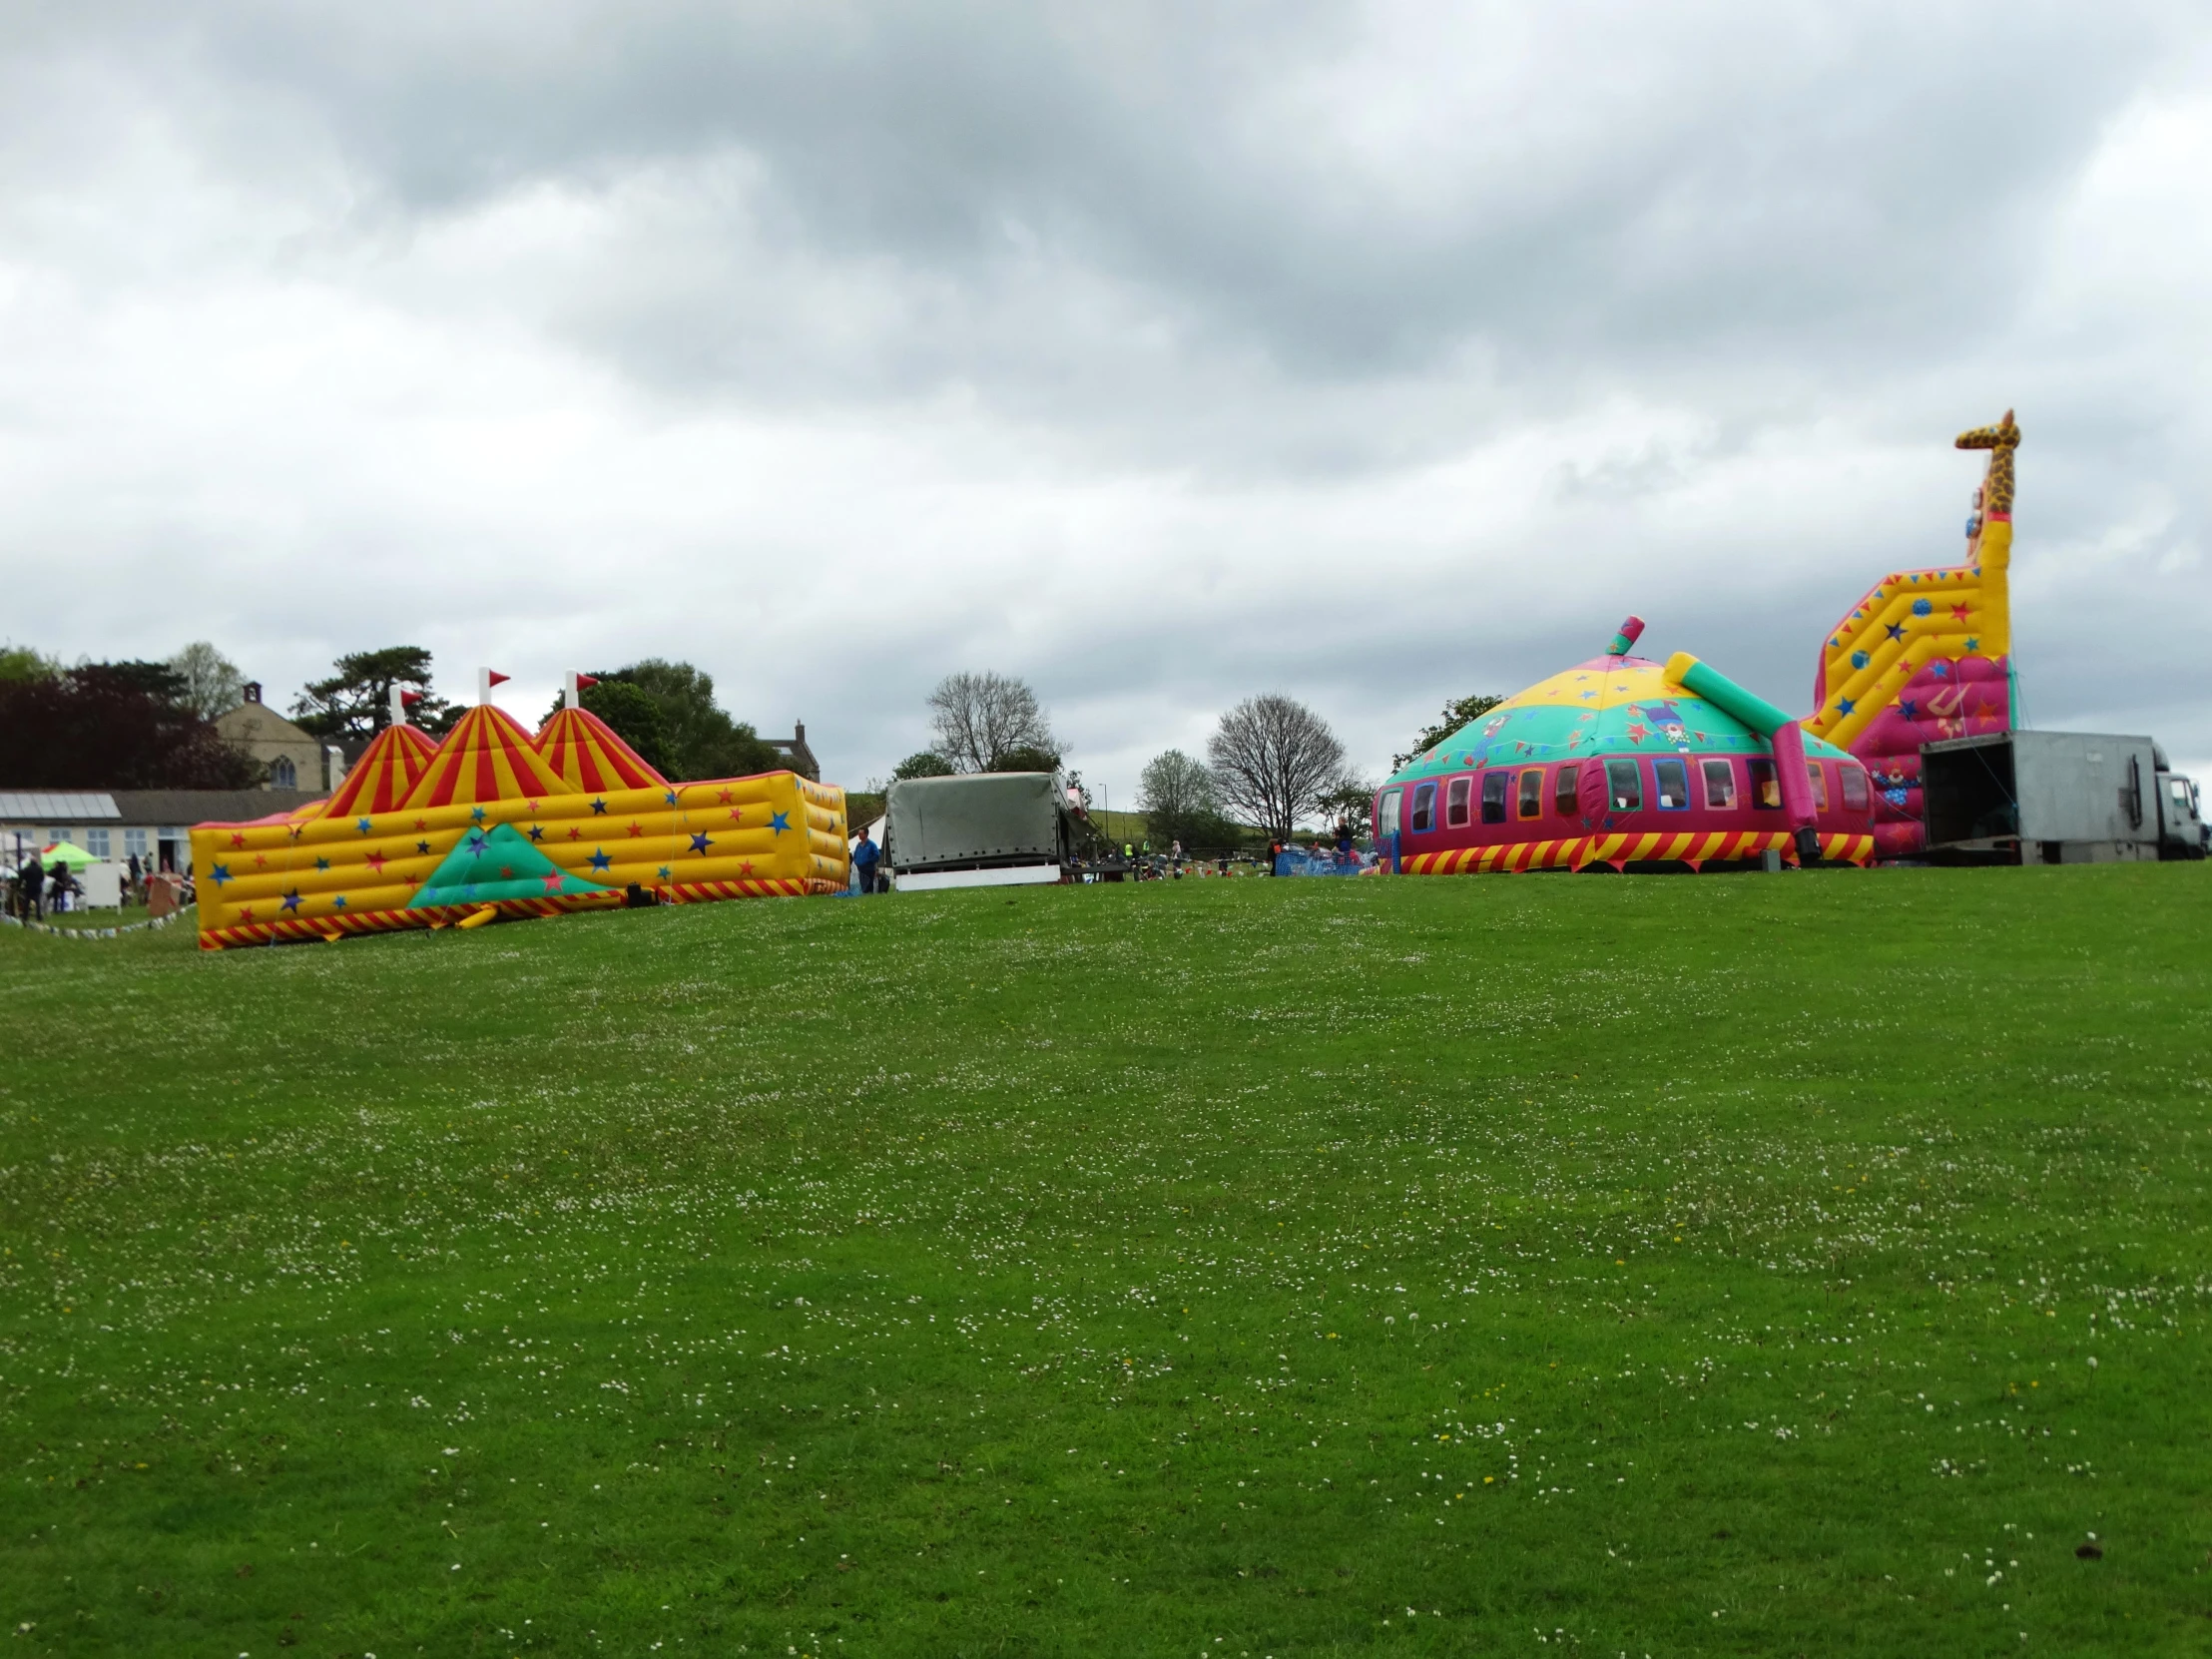 a number of inflatable animal structures with many people nearby